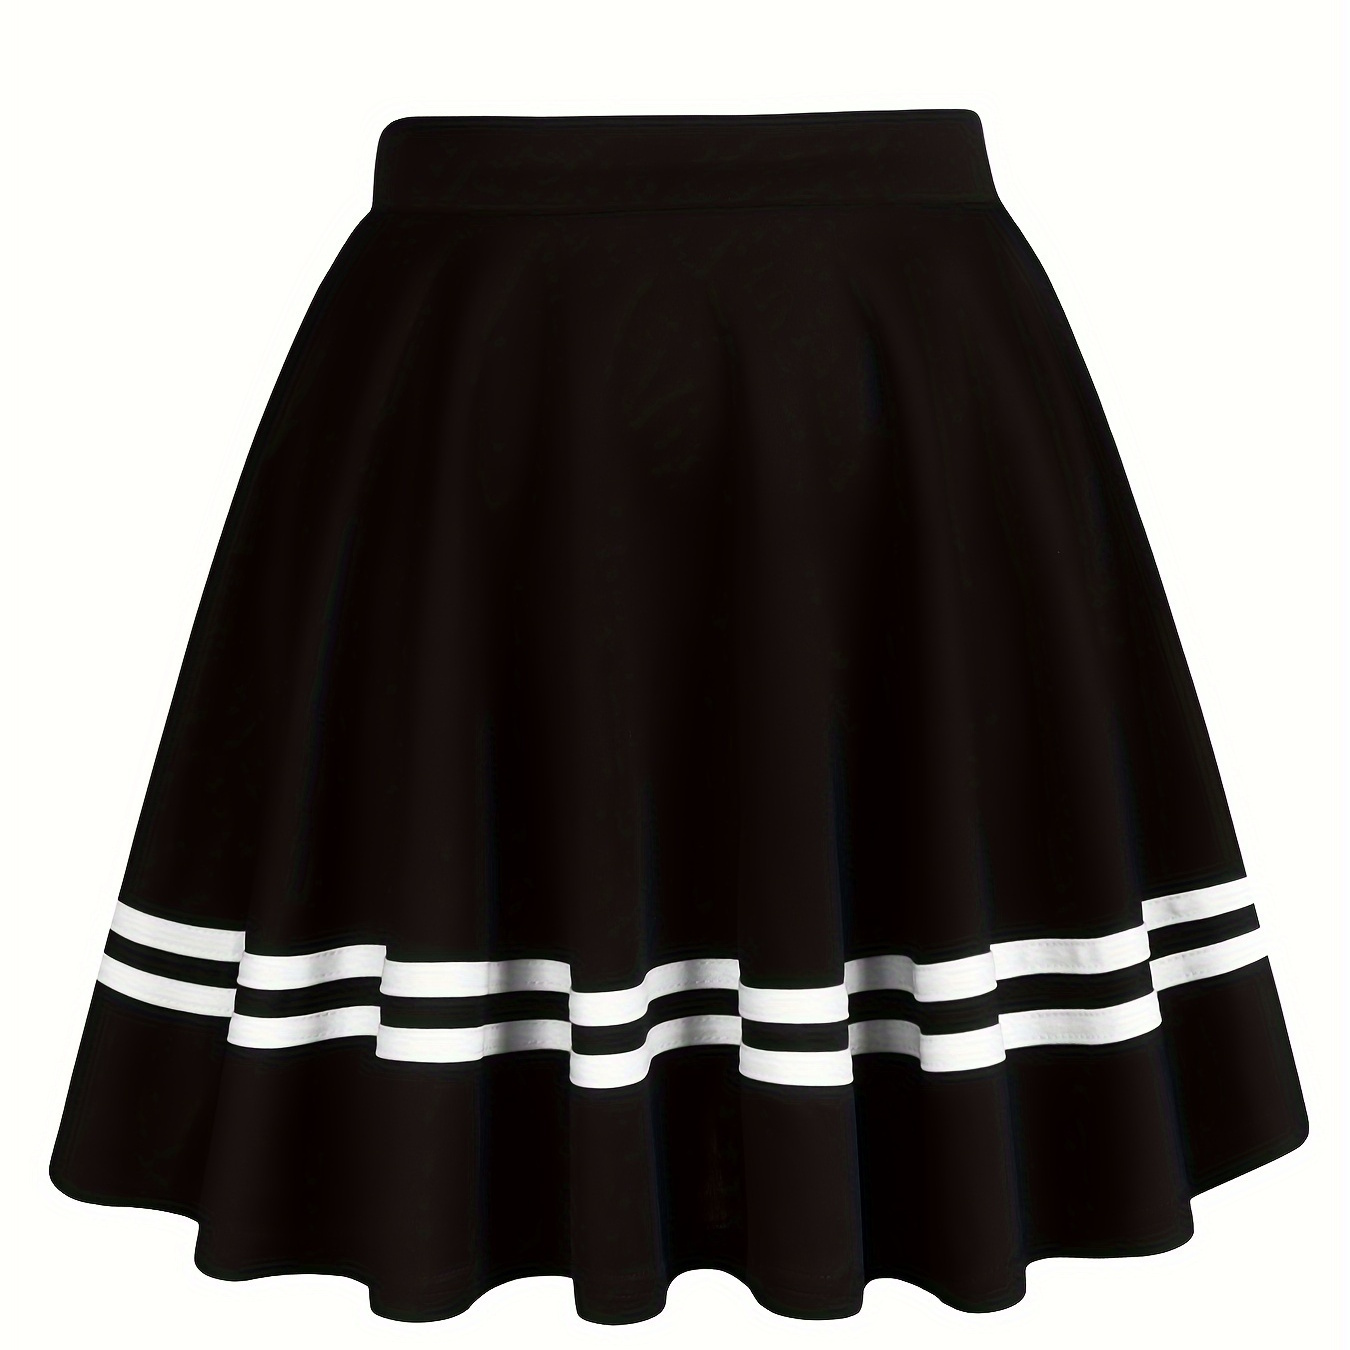 

Women's High-waisted Athletic Skirt, Anti-exposure Quick-dry Pleated Golf Tennis Skirt With Stripe Detail, Sporty Style